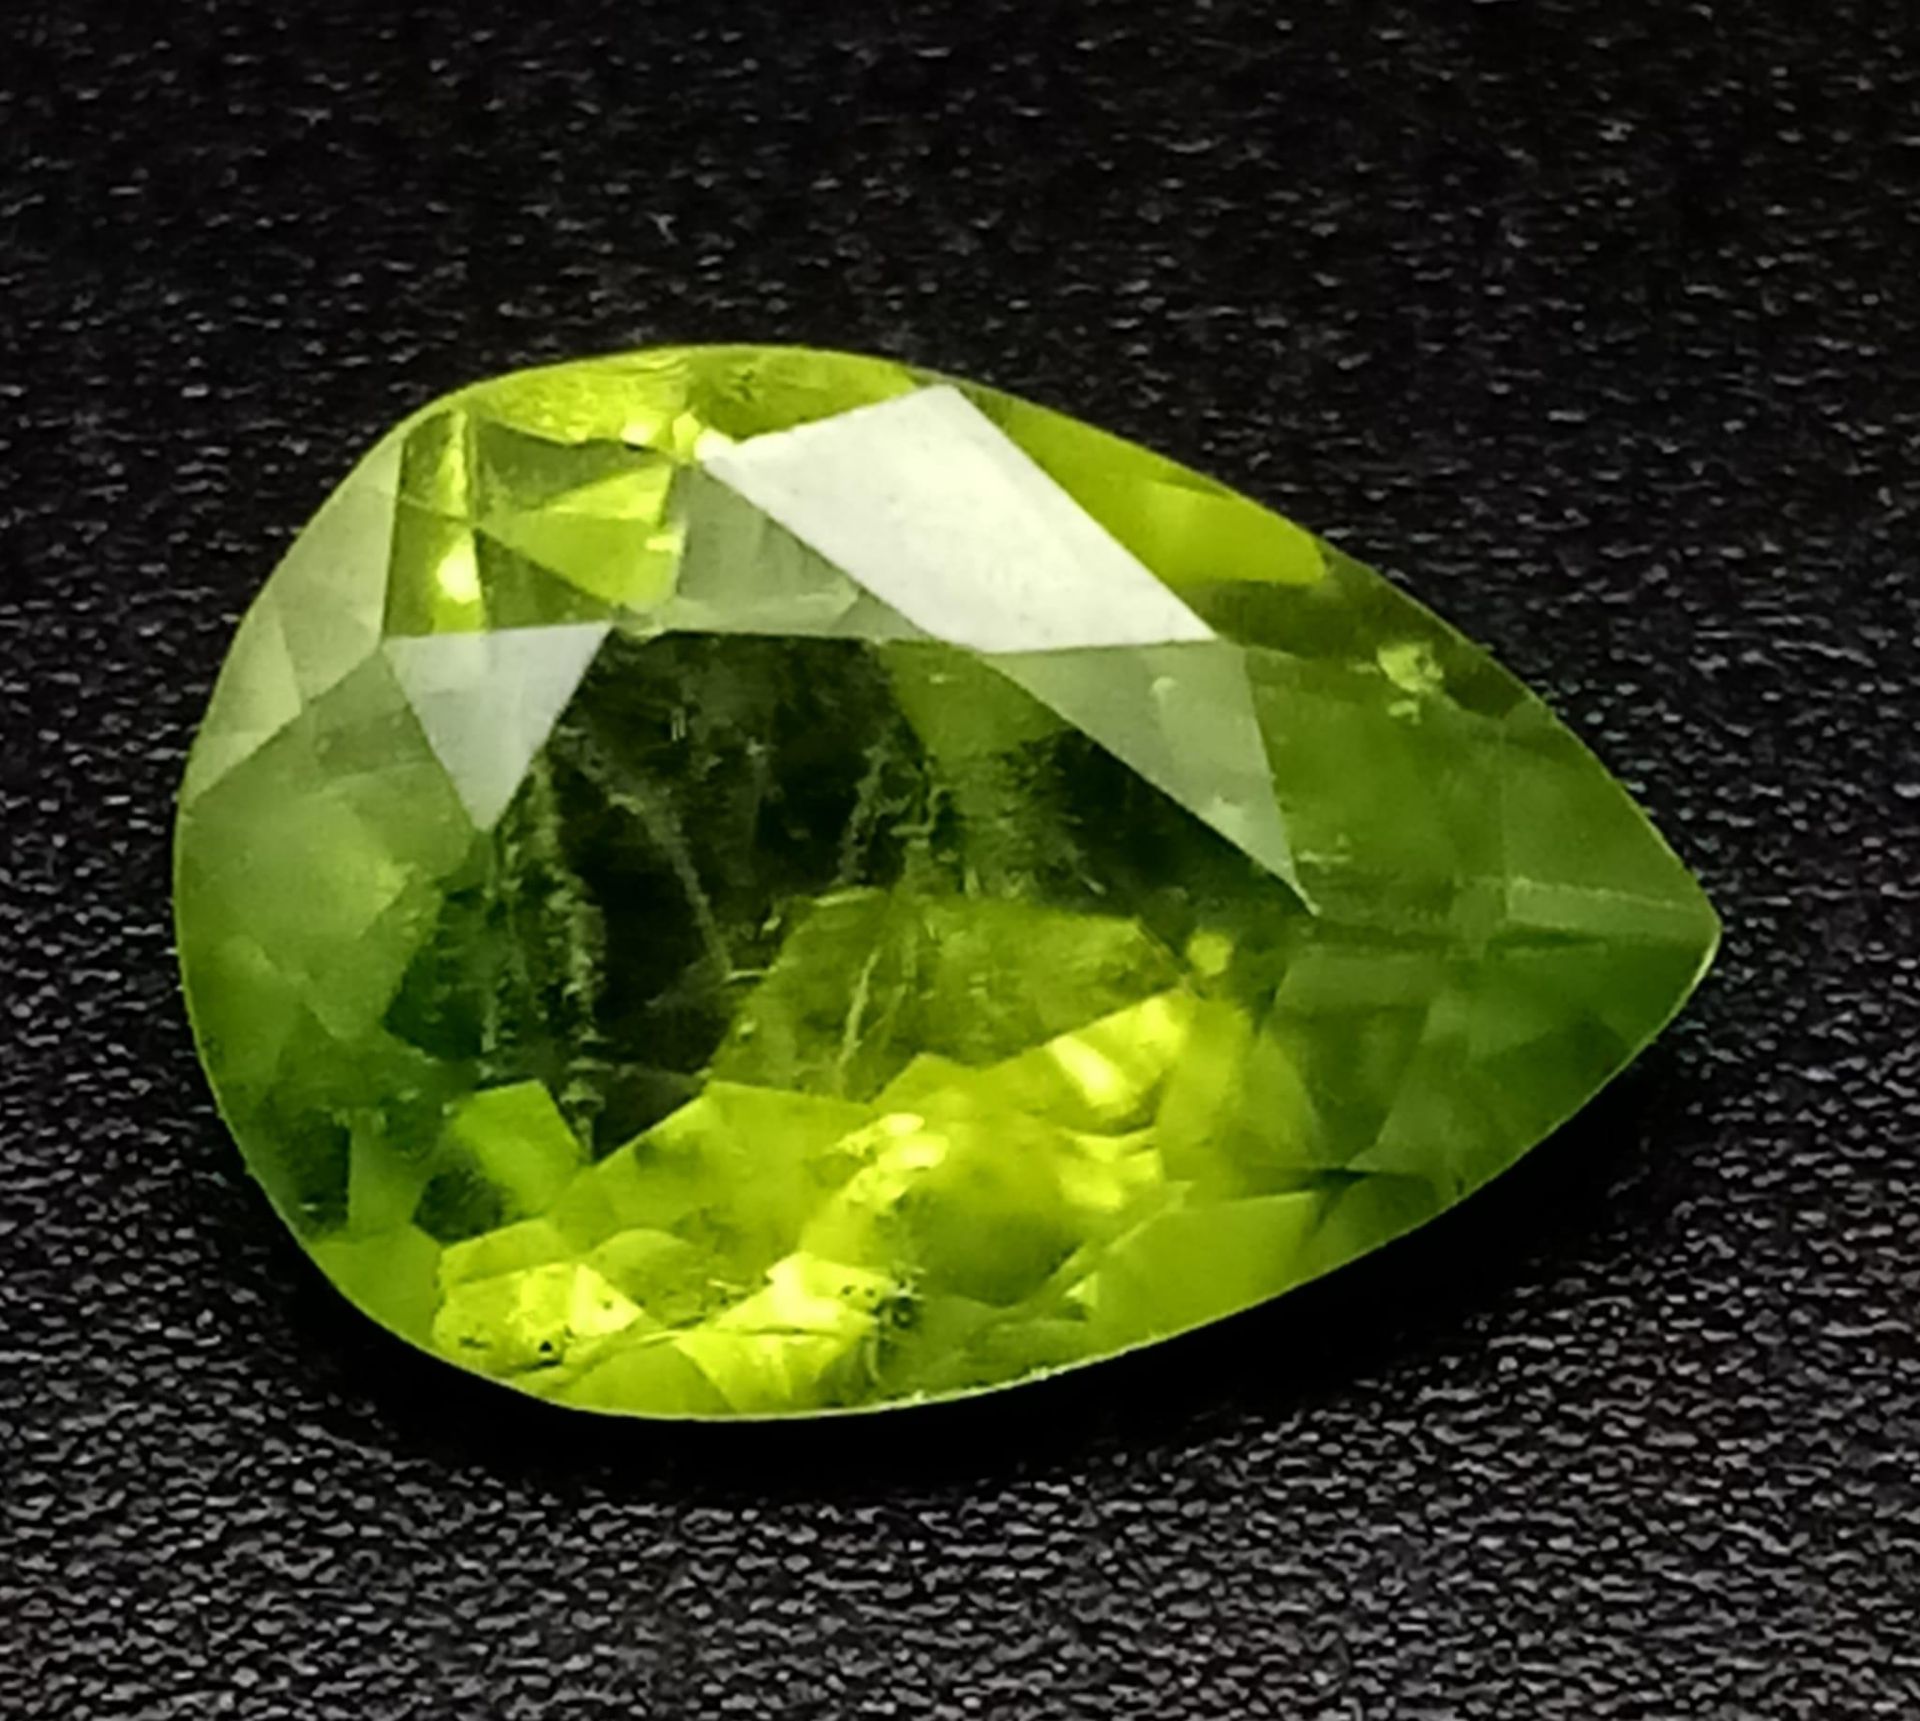 A 2.53ct Pakistani Peridot Gemstone. Pear shaped and comes with a GFCO Swiss Certificate.